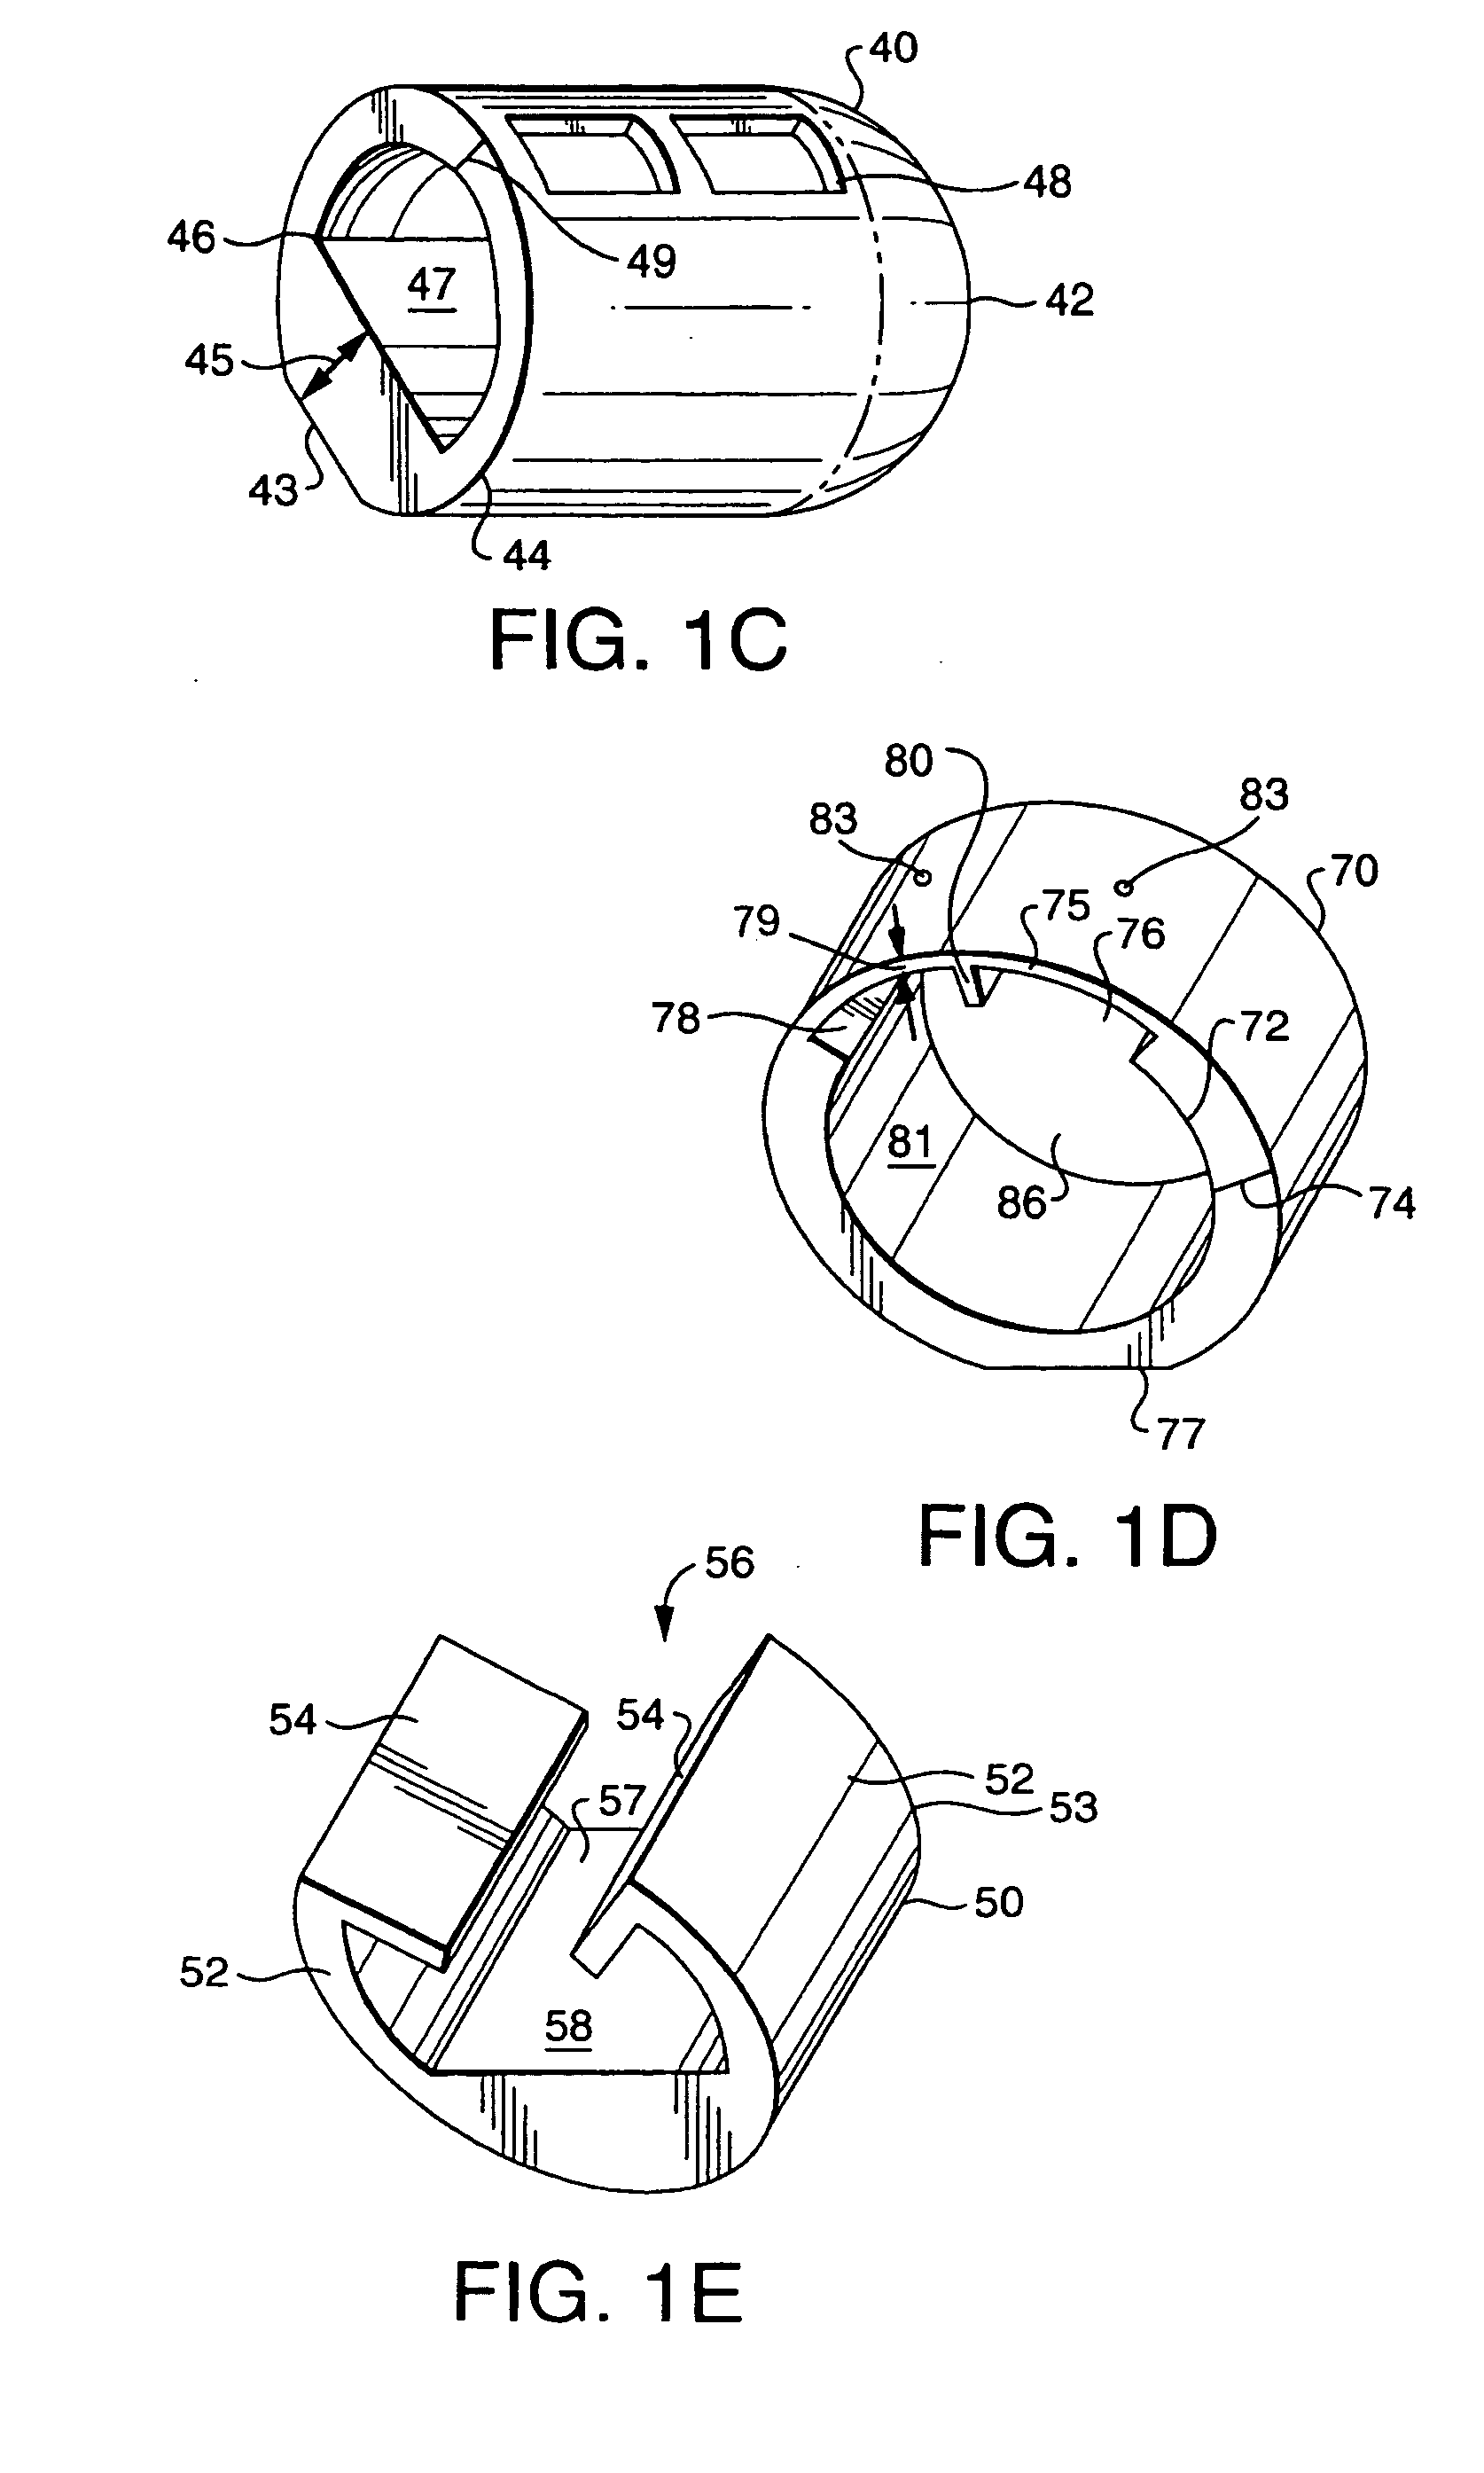 Diagnostic test device and method of using same